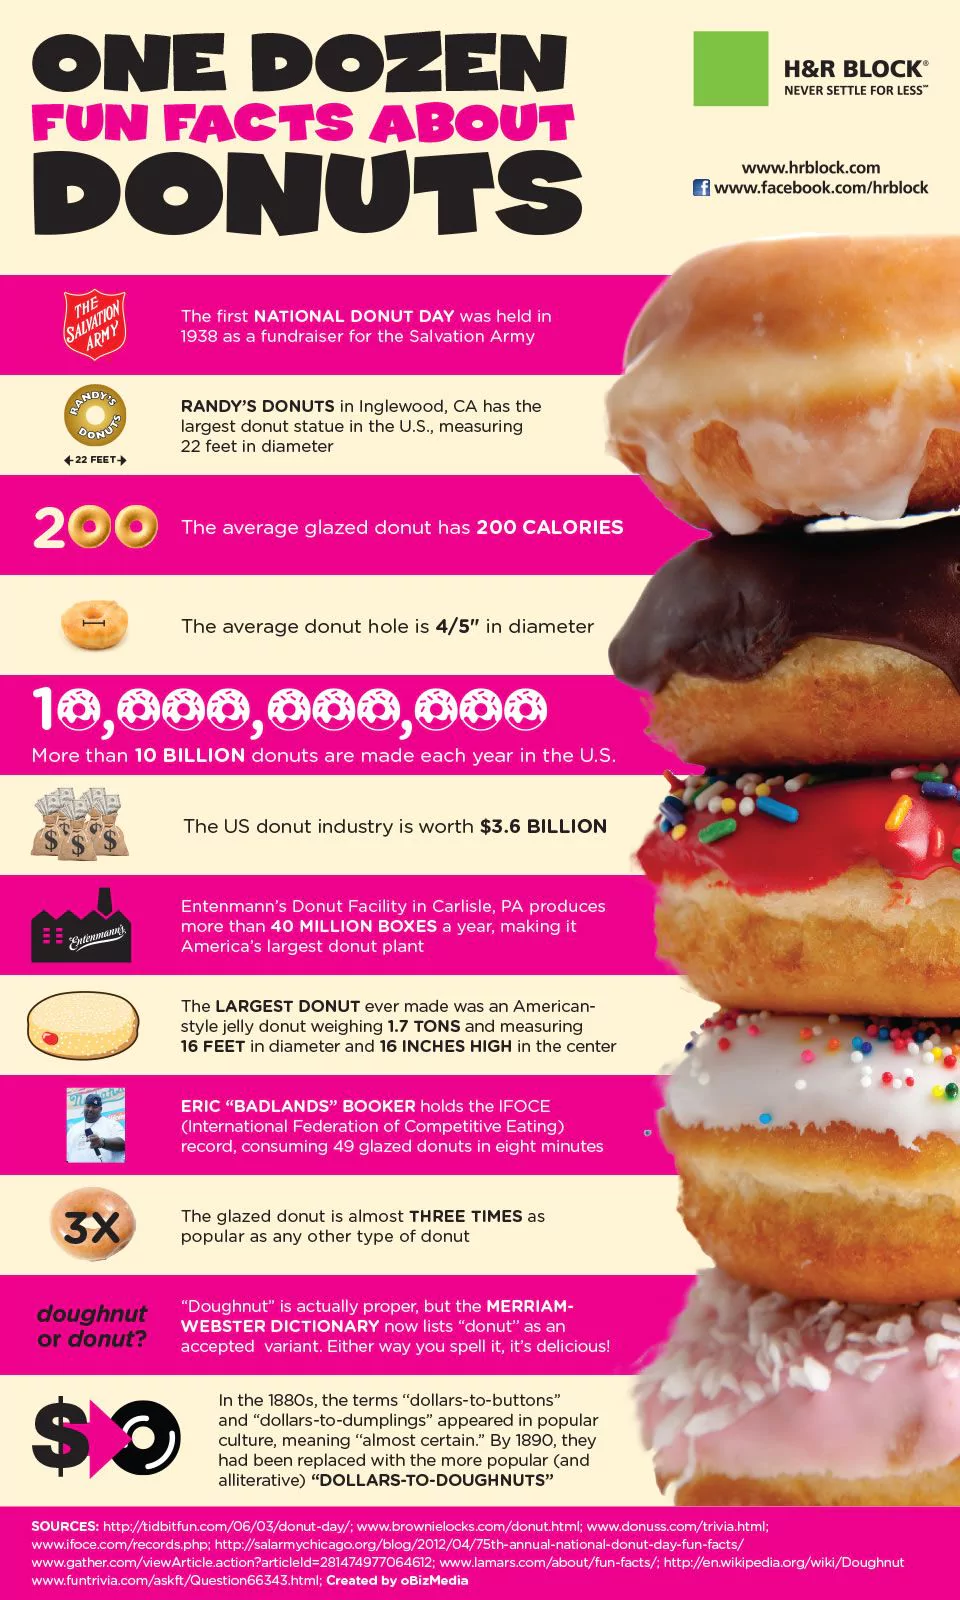 Fun Facts About Donuts